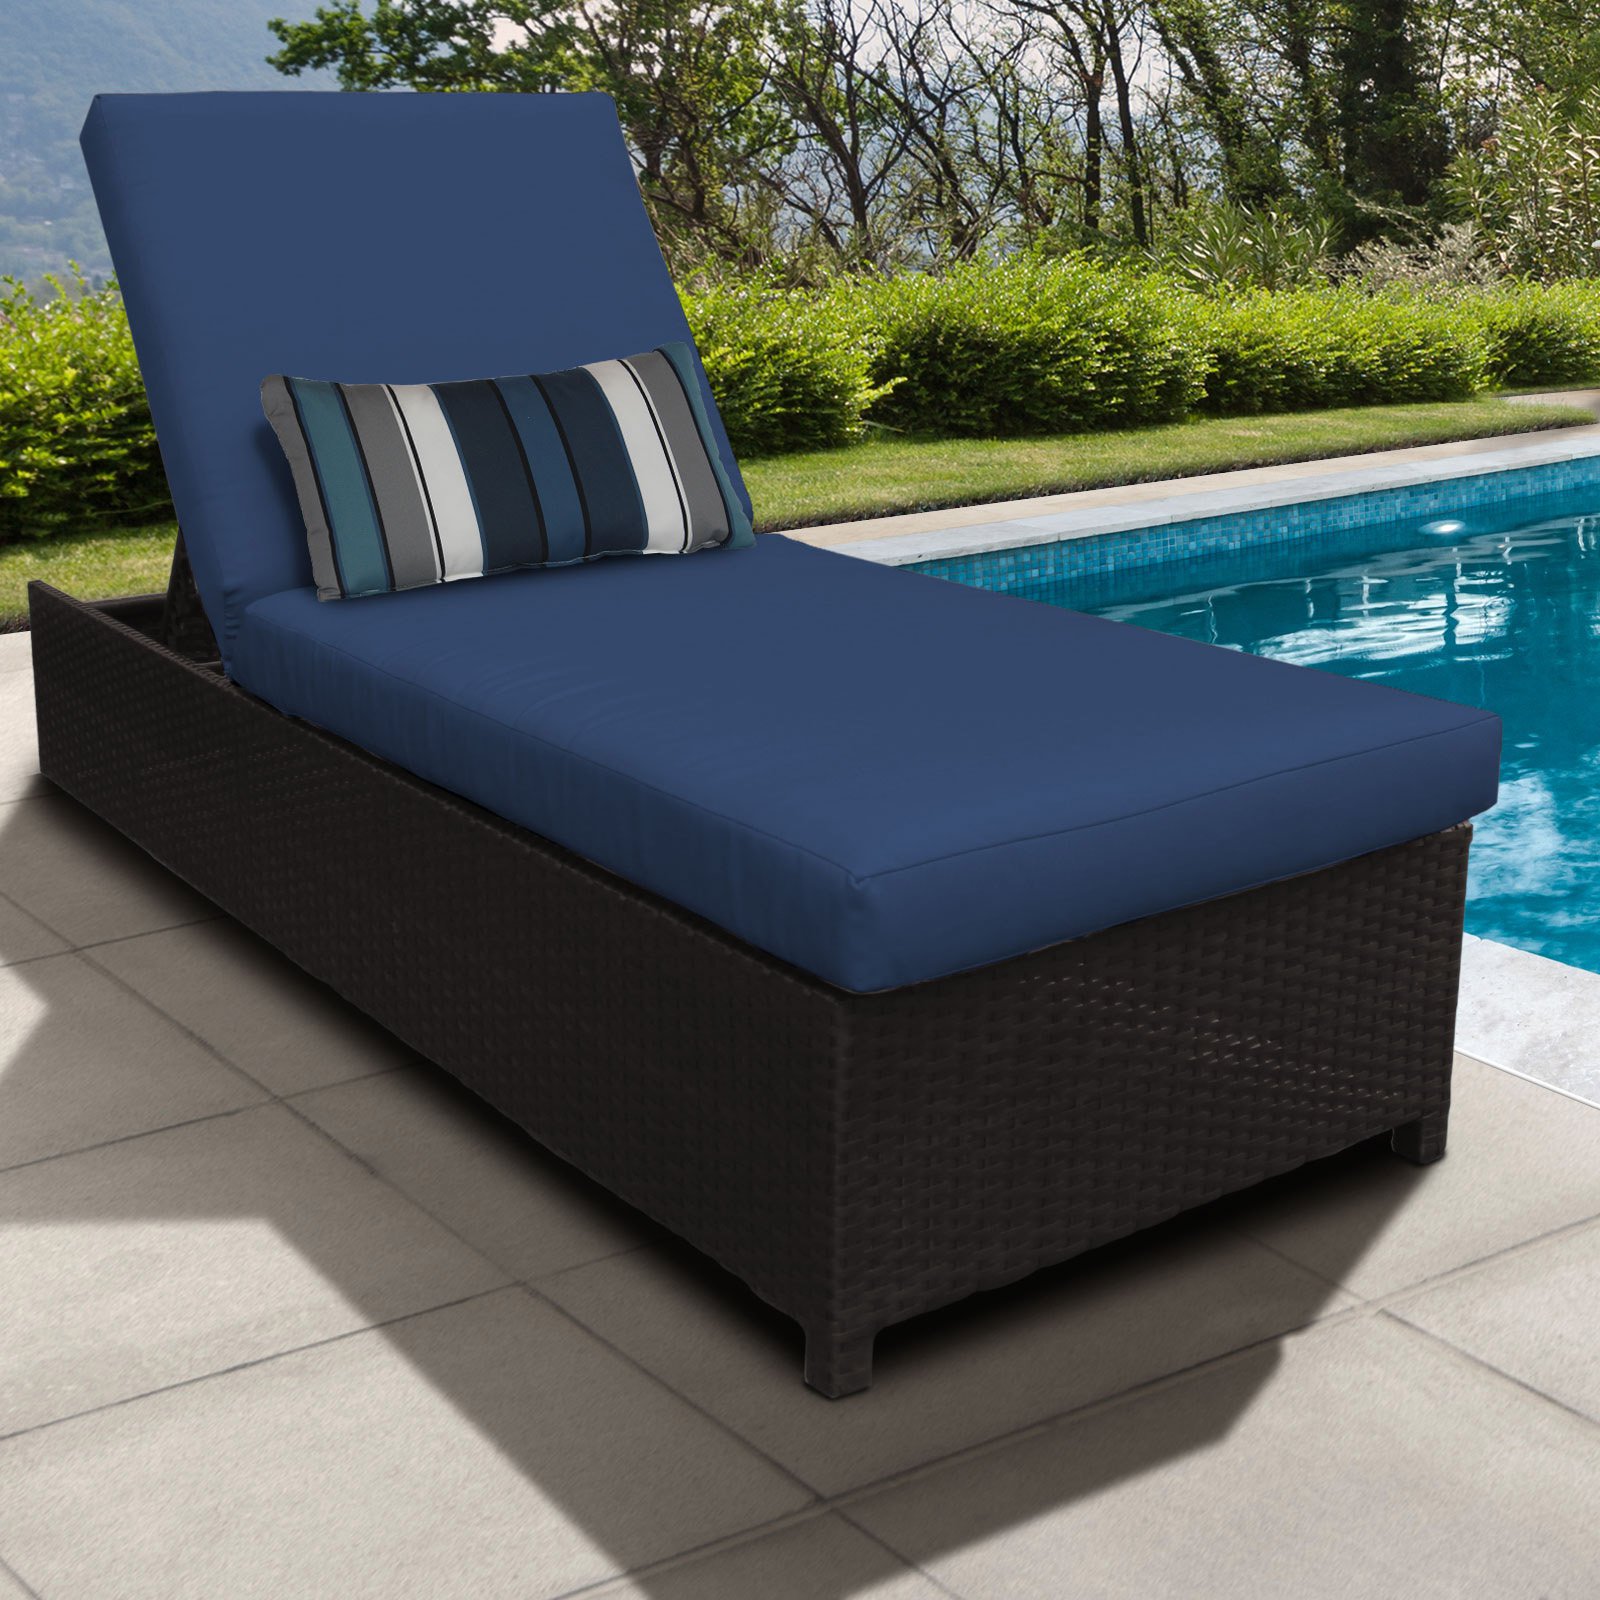 TK Classics Barbados Wheeled Wicker Outdoor Chaise Lounge Chair - image 4 of 11